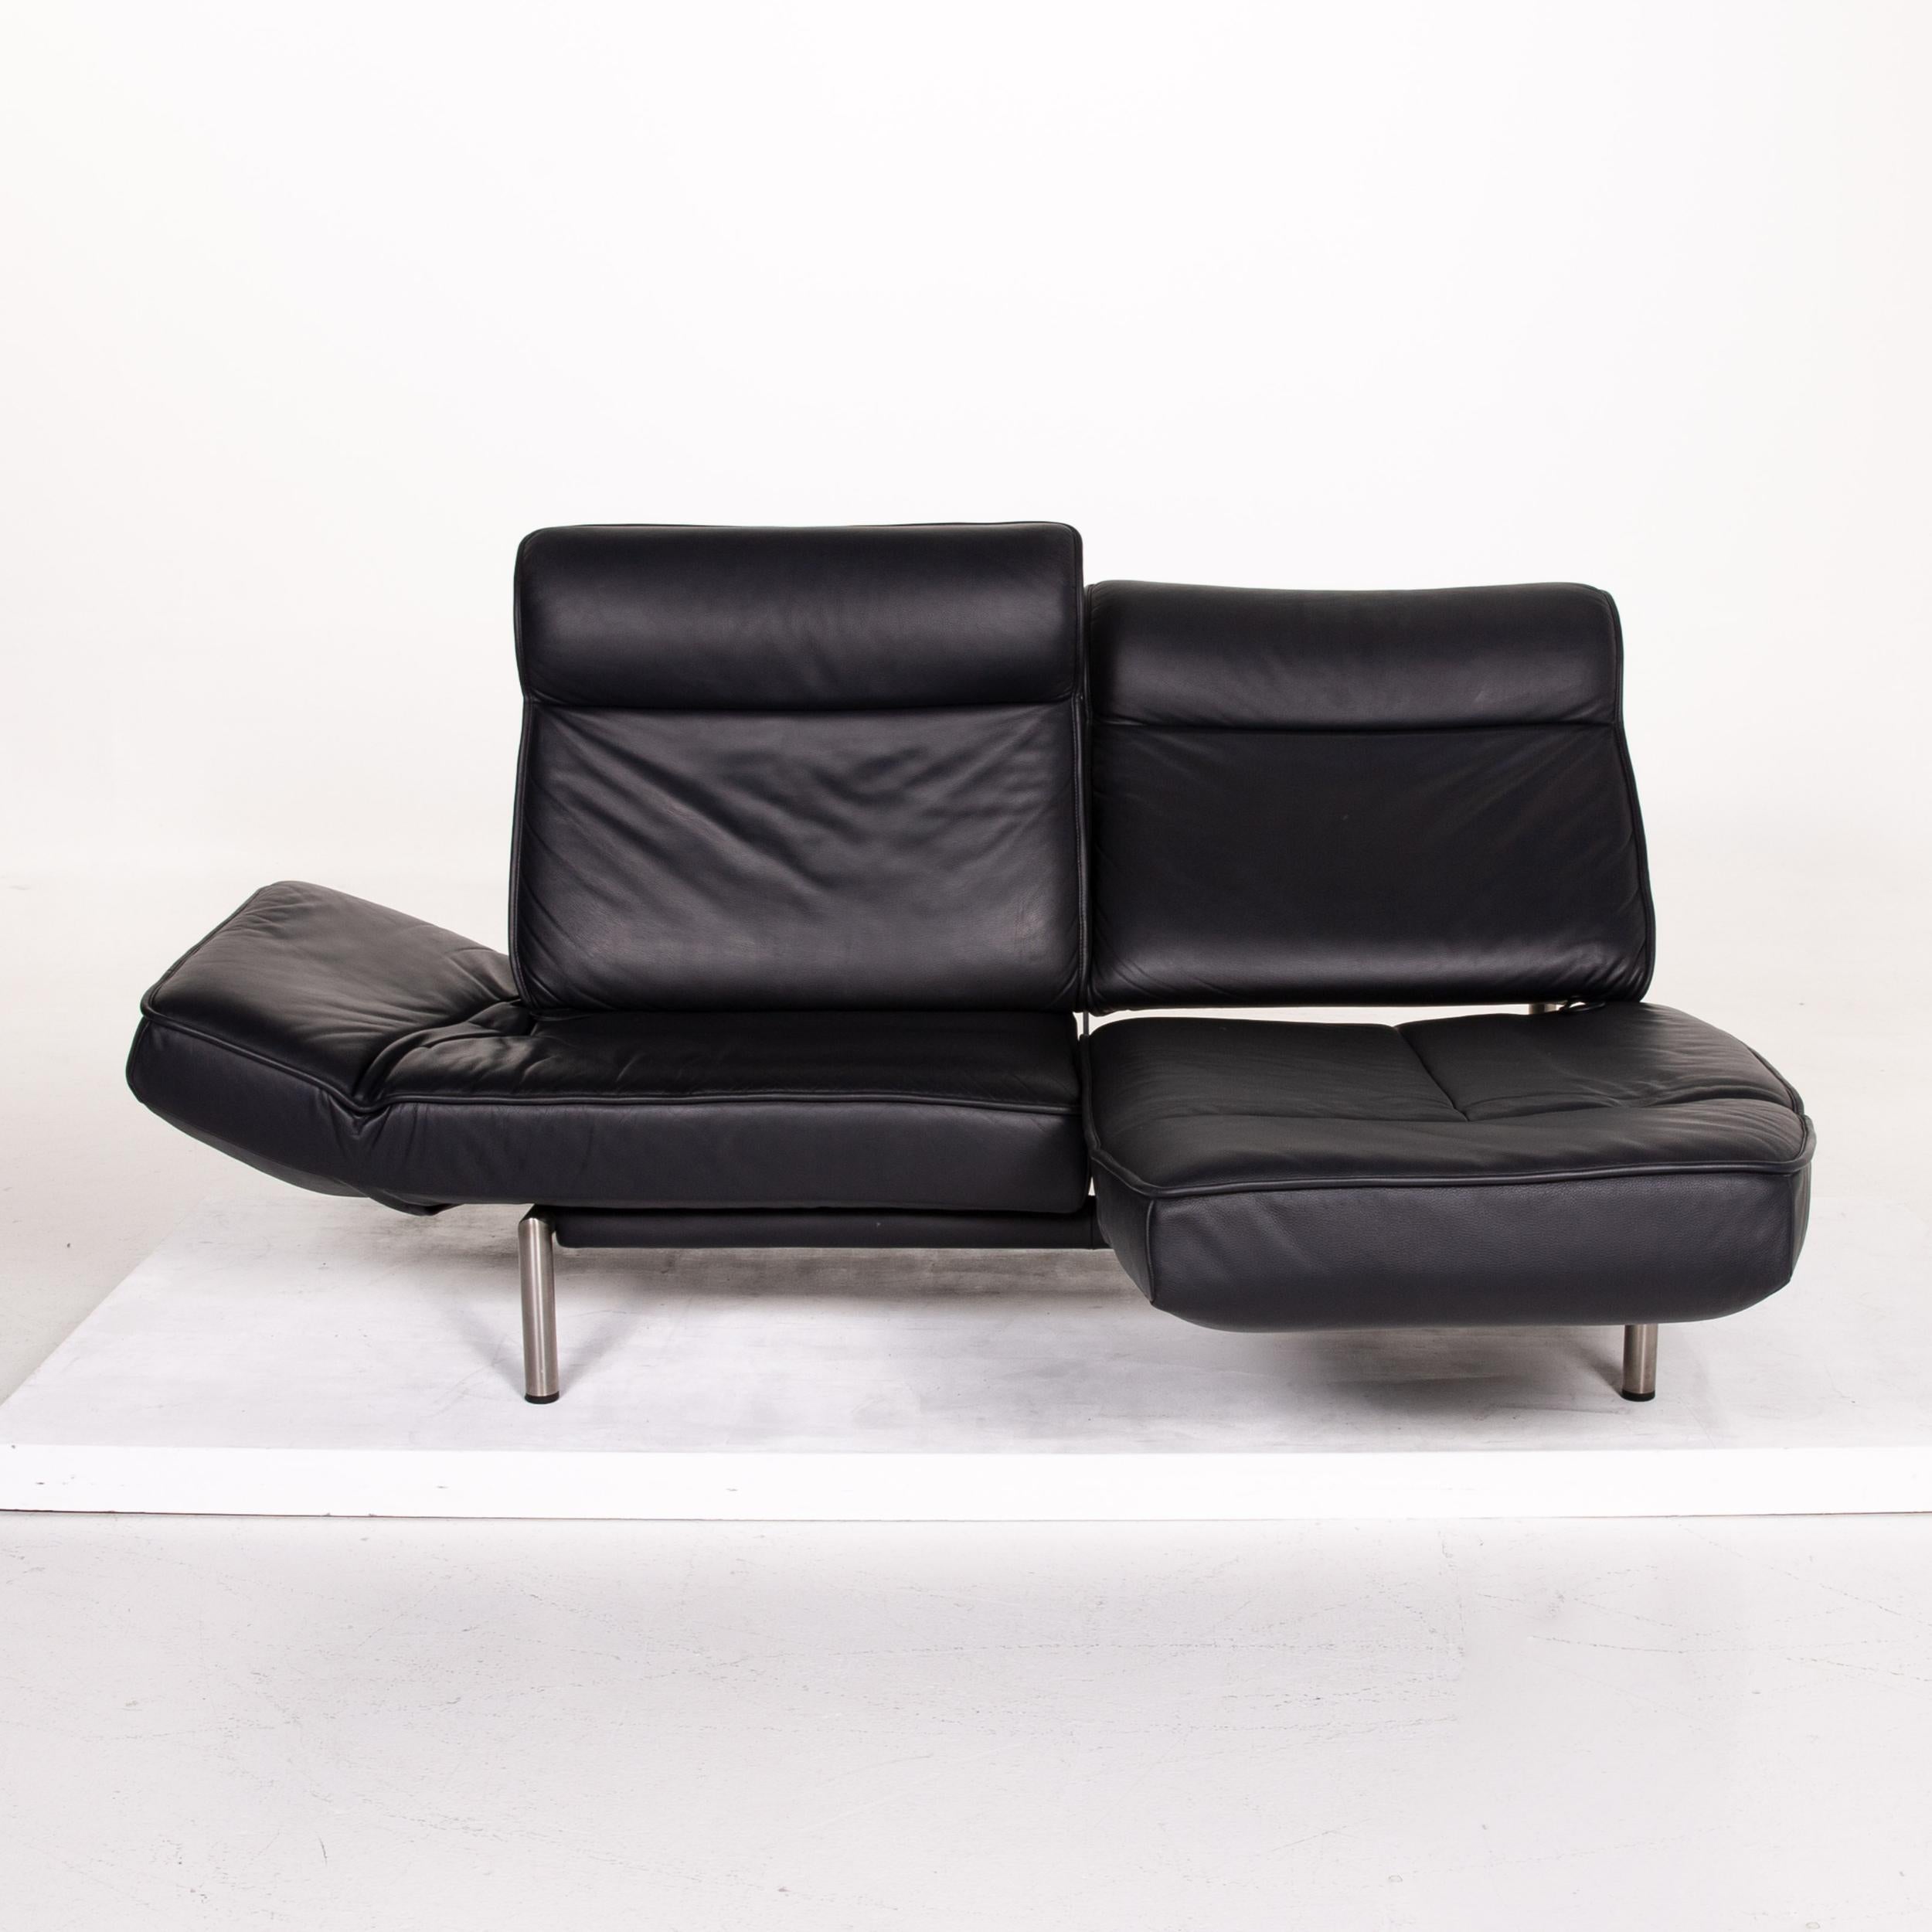 De Sede DS 450 Leather Sofa Black Two-Seat Function Relax Function Couch 1